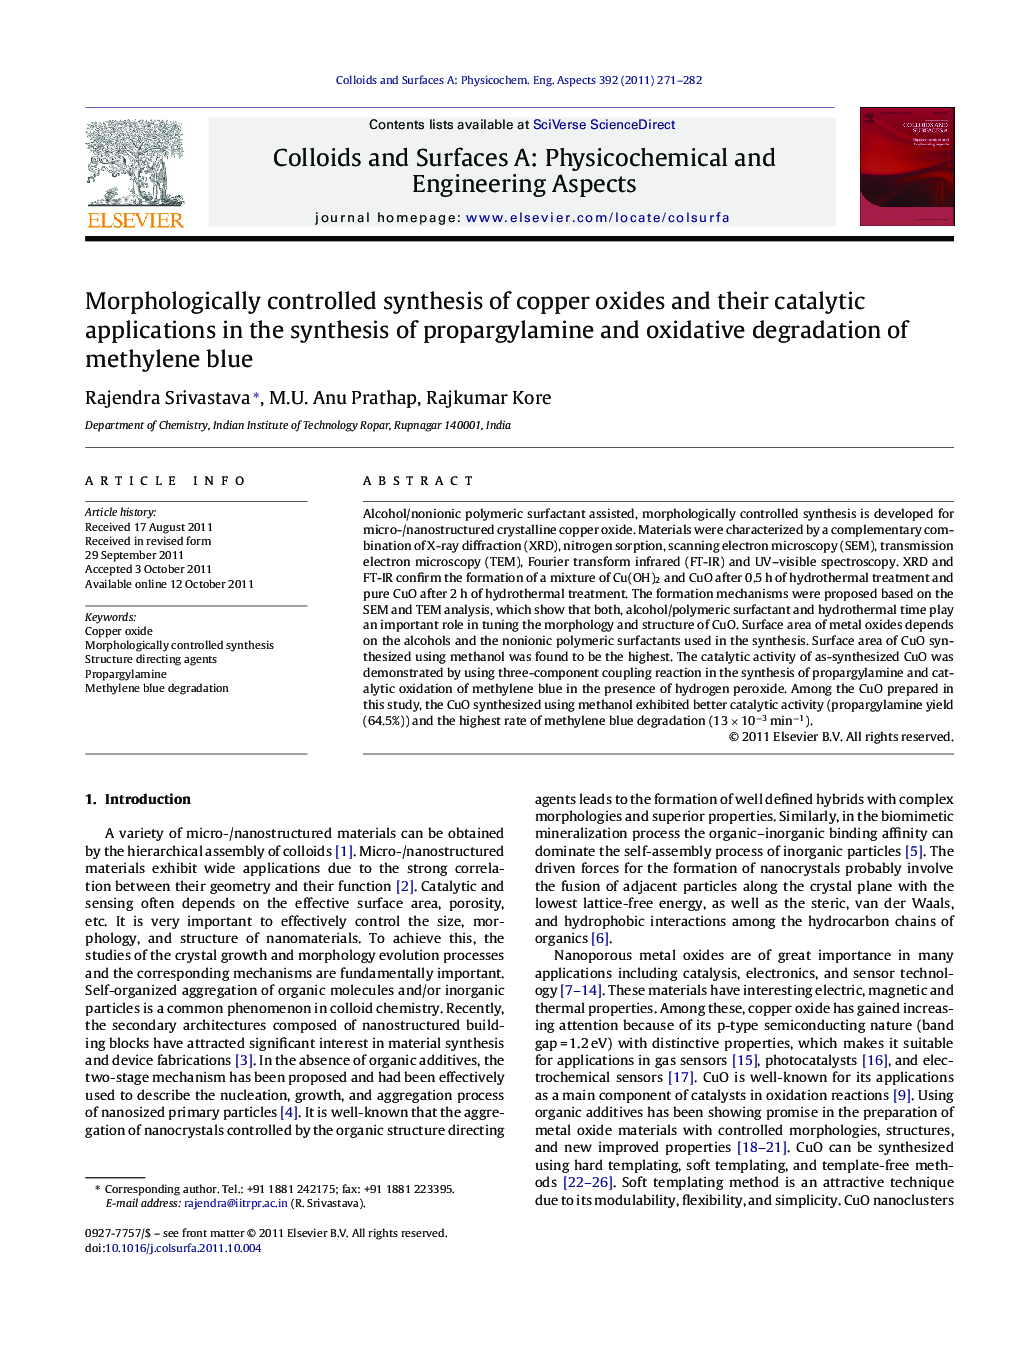 Morphologically controlled synthesis of copper oxides and their catalytic applications in the synthesis of propargylamine and oxidative degradation of methylene blue